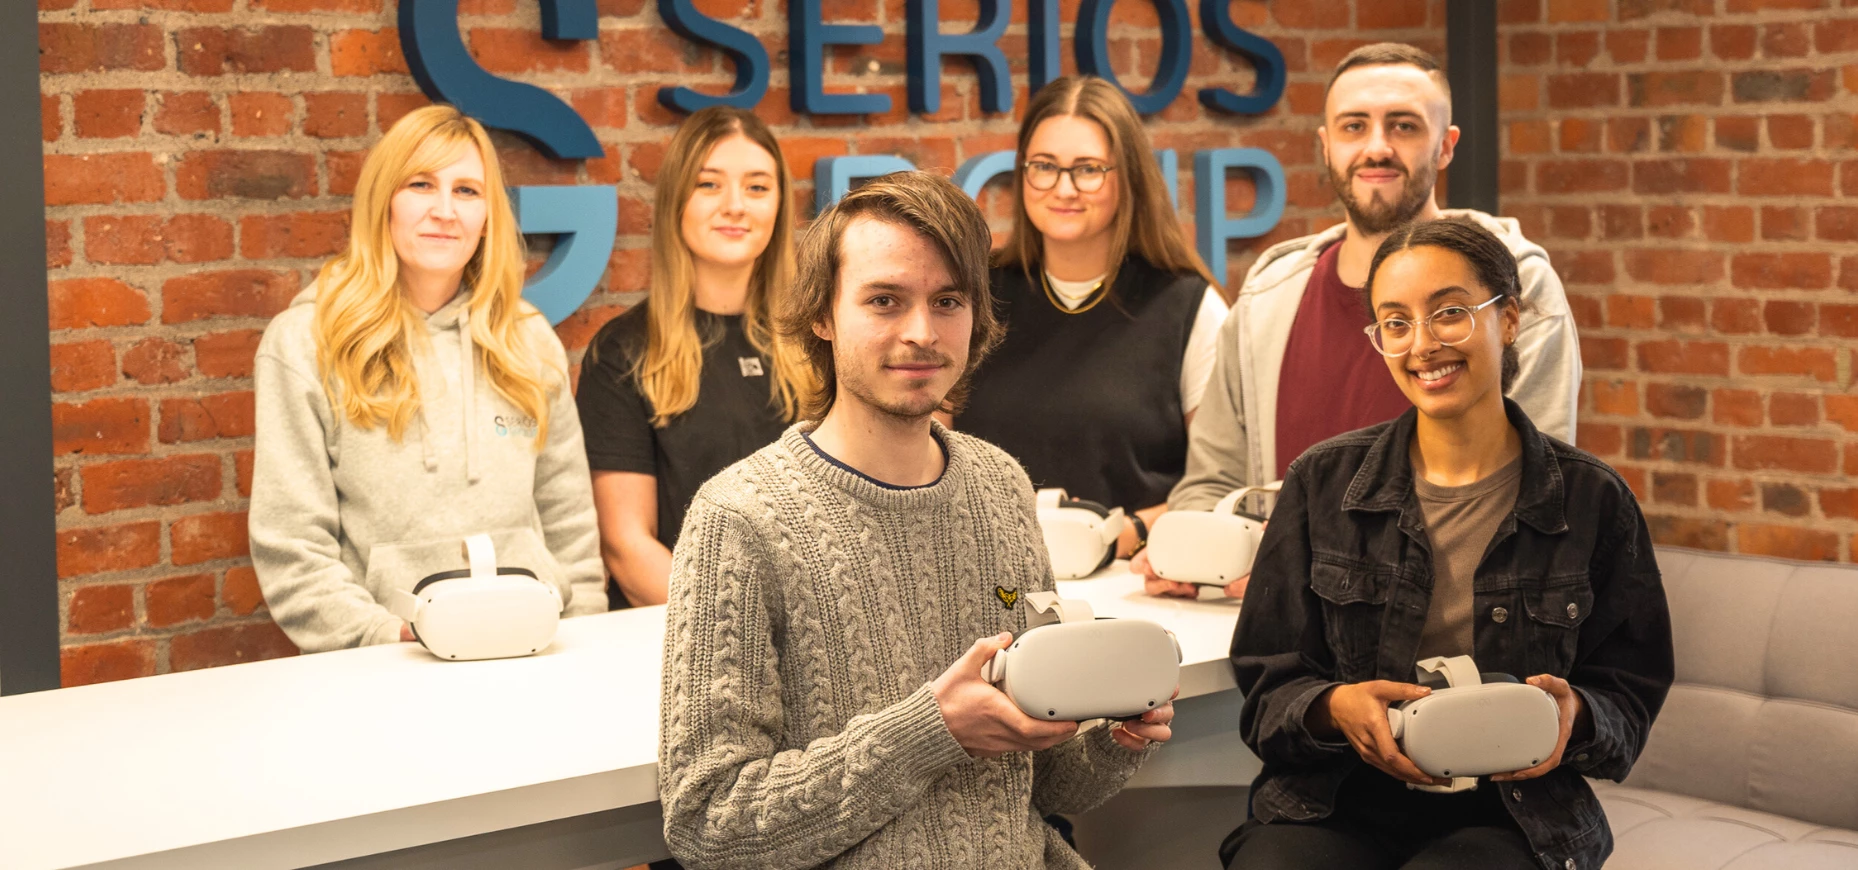 Members of the Seriös Group team receiving their new virtual reality headsets.